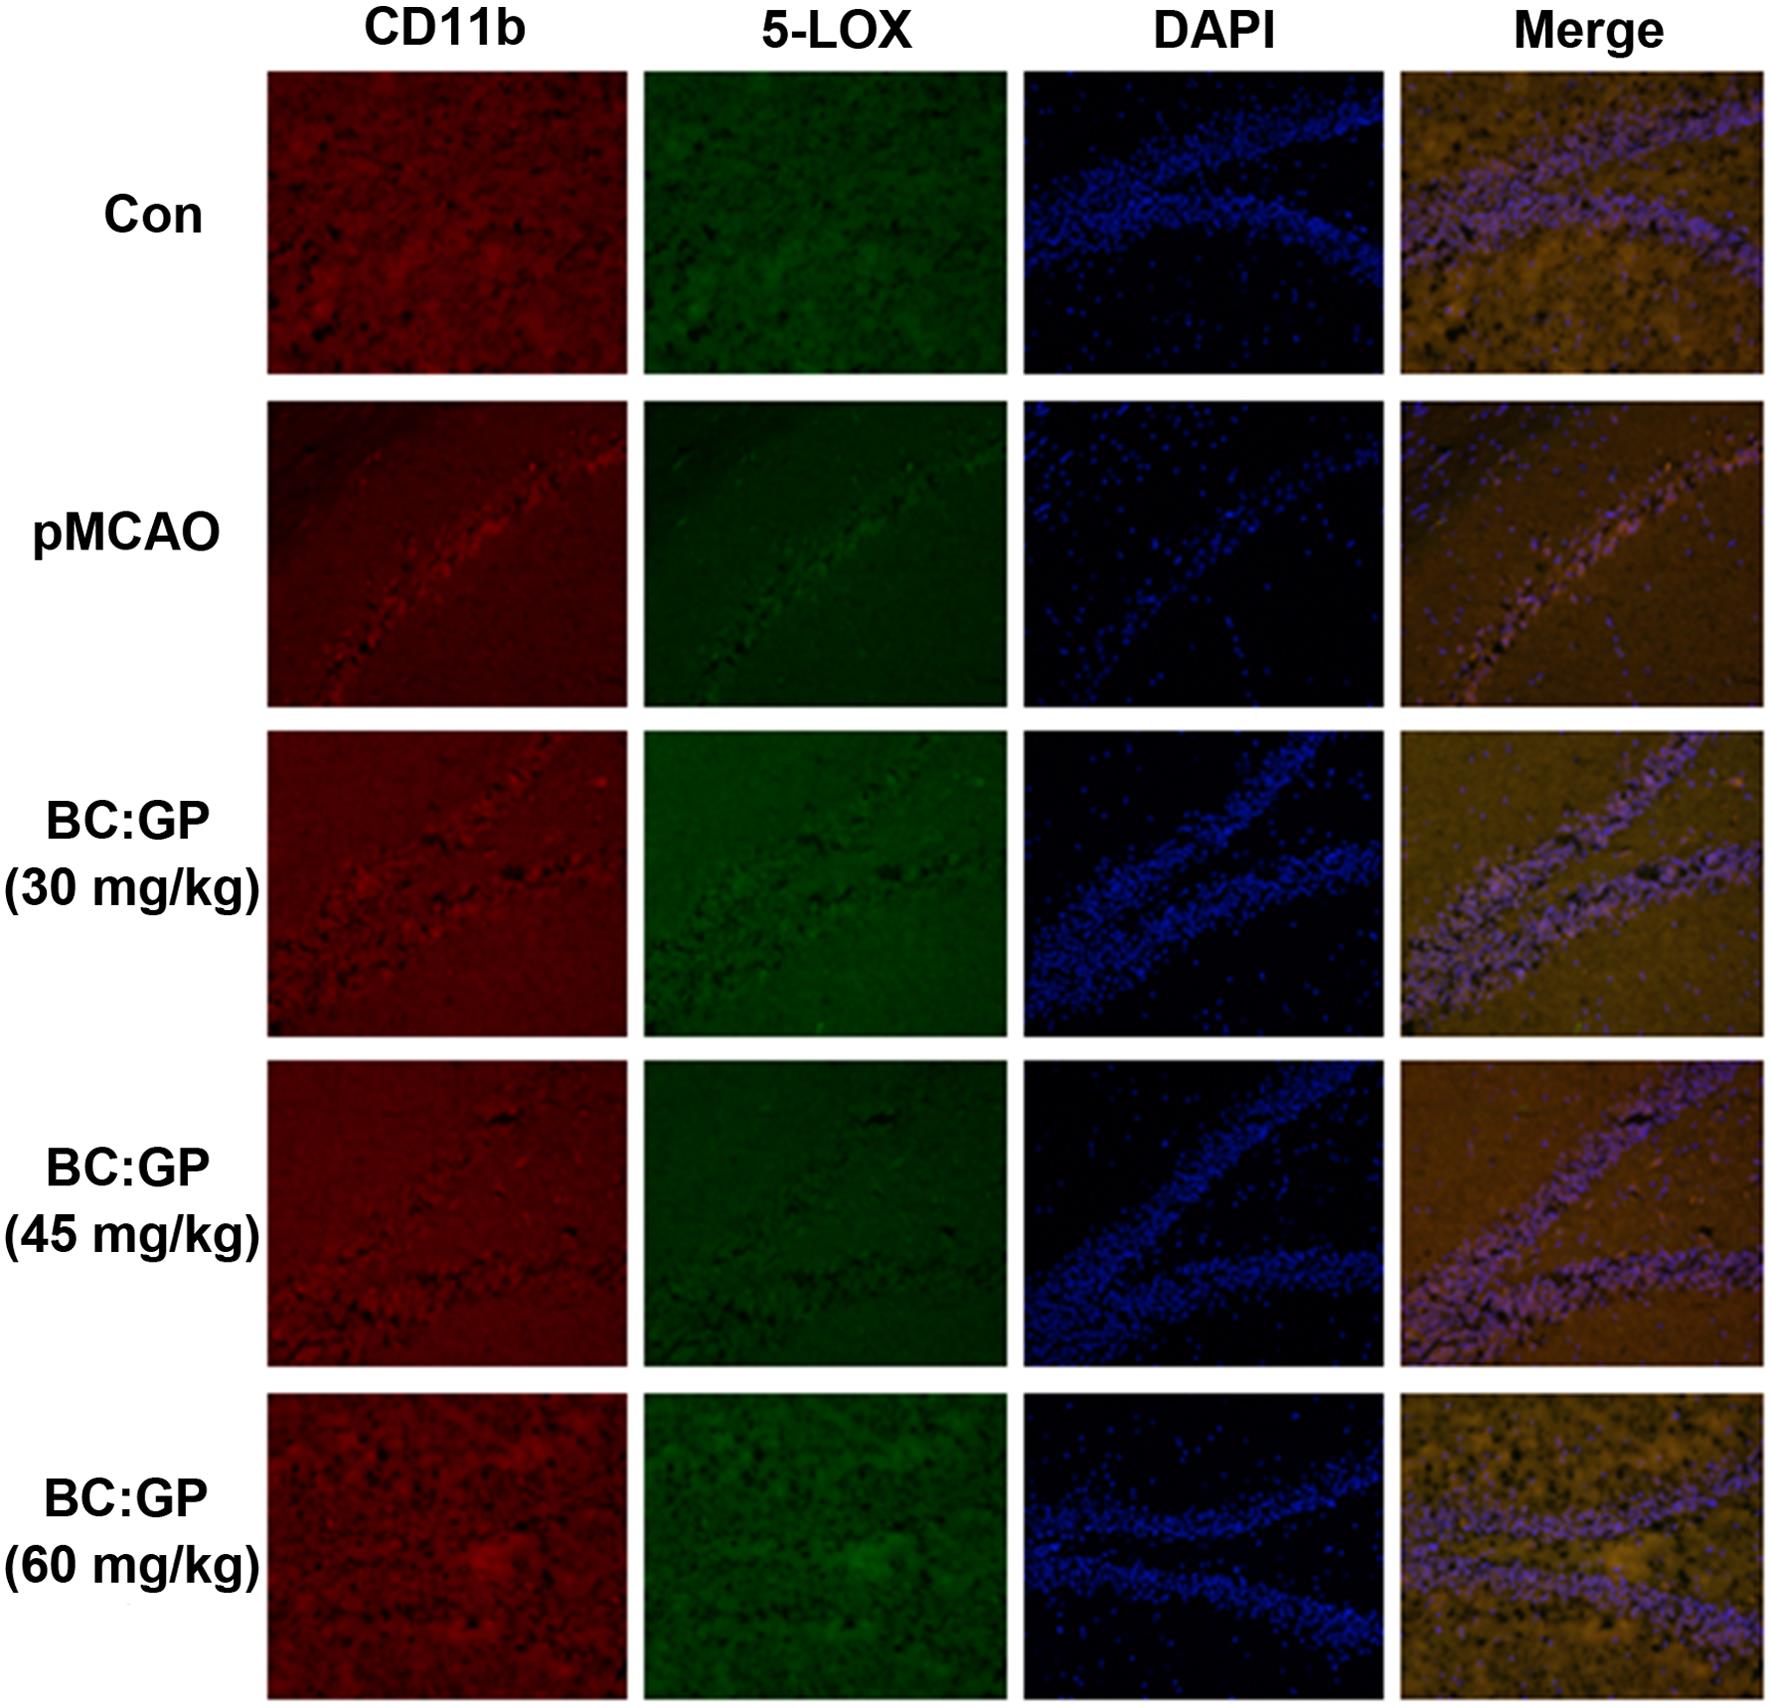 Effect of the BC/GP combination (7:3) on microglia and 5-LOX expression in the brain tissue of pMCAO rats (35 d).